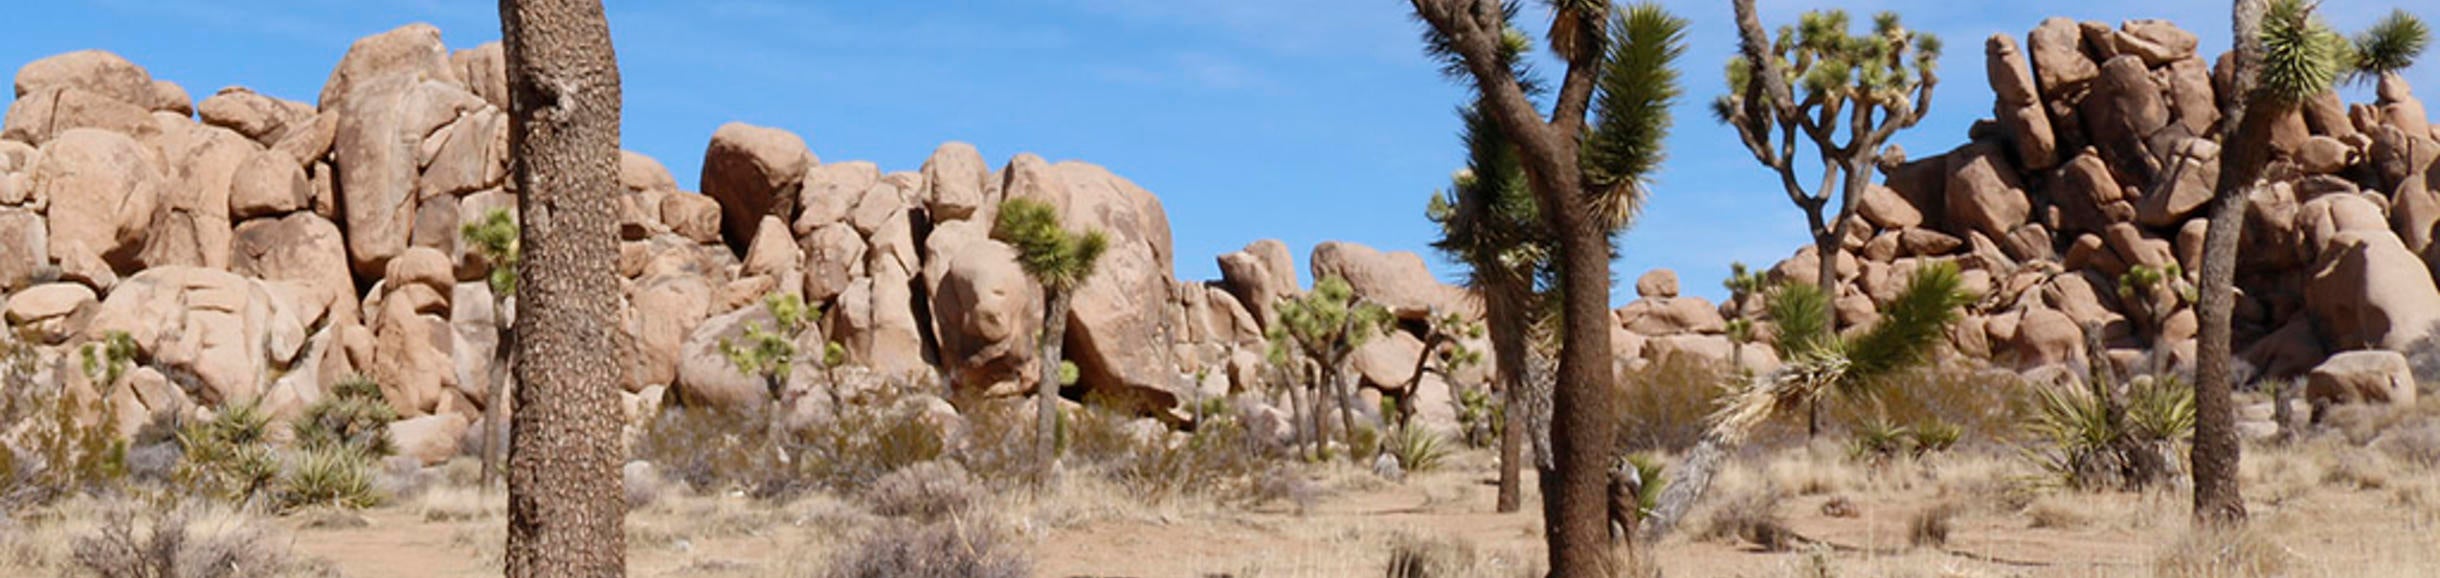 The California Desert, with rocks in the background and three trees in the foreground.